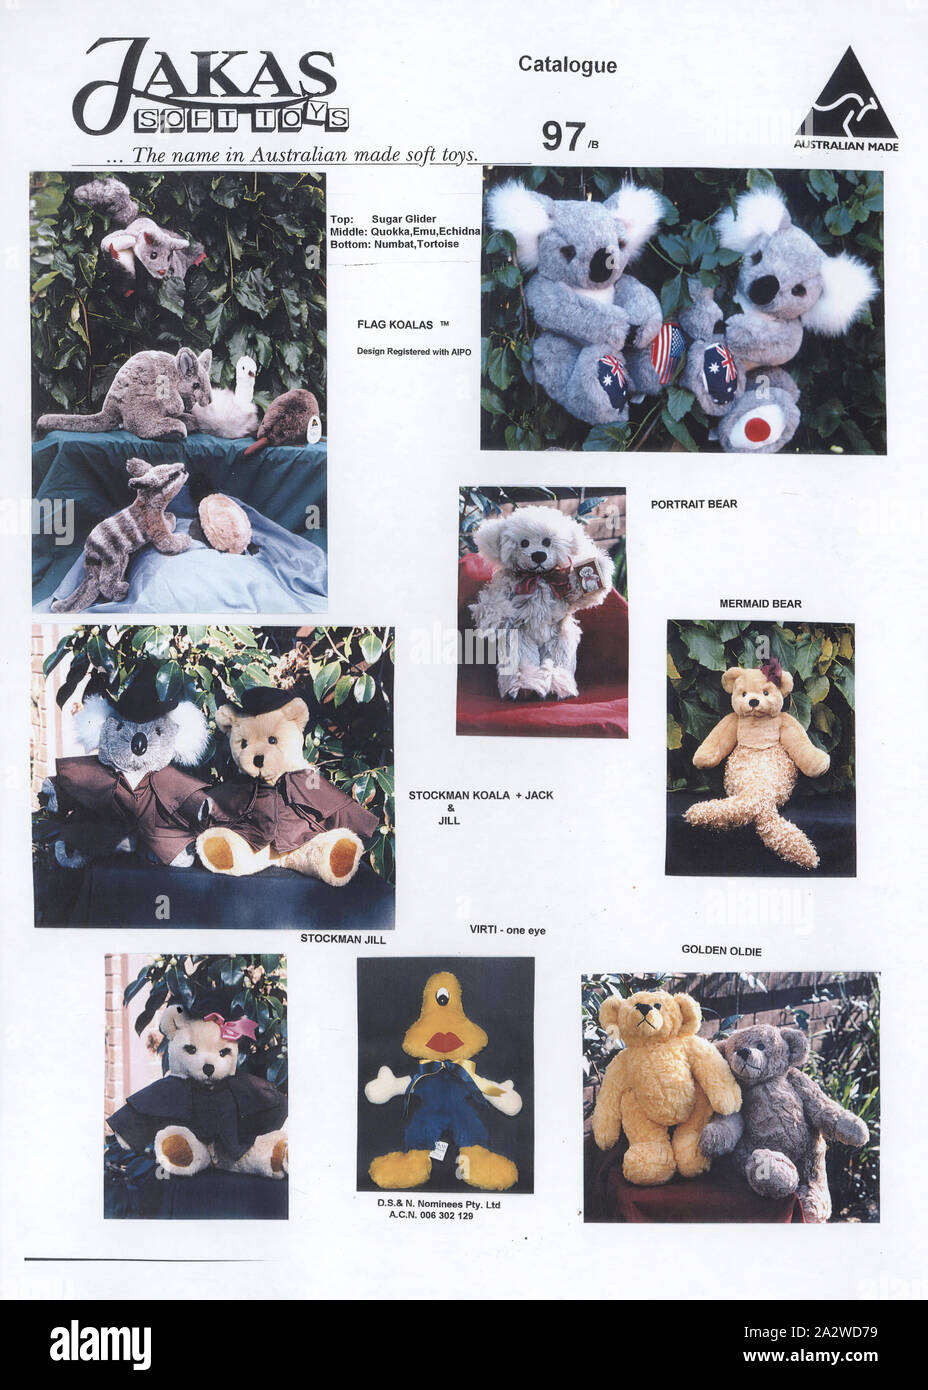 Advertising Flyer - Jakas Soft Toys, Melbourne, 1997, A single page advertising flyer showing a range of soft toys including teddy bears, Australian animals and a science fiction character named 'Virti - one eye'. Jakas Soft Toys was a Melbourne-based company which designed and manufactured genuine high quality soft toys from 1956. Their range included teddy bears, golliwogs and Australian native animals. Jakas Soft Toys ceased production in Stock Photo